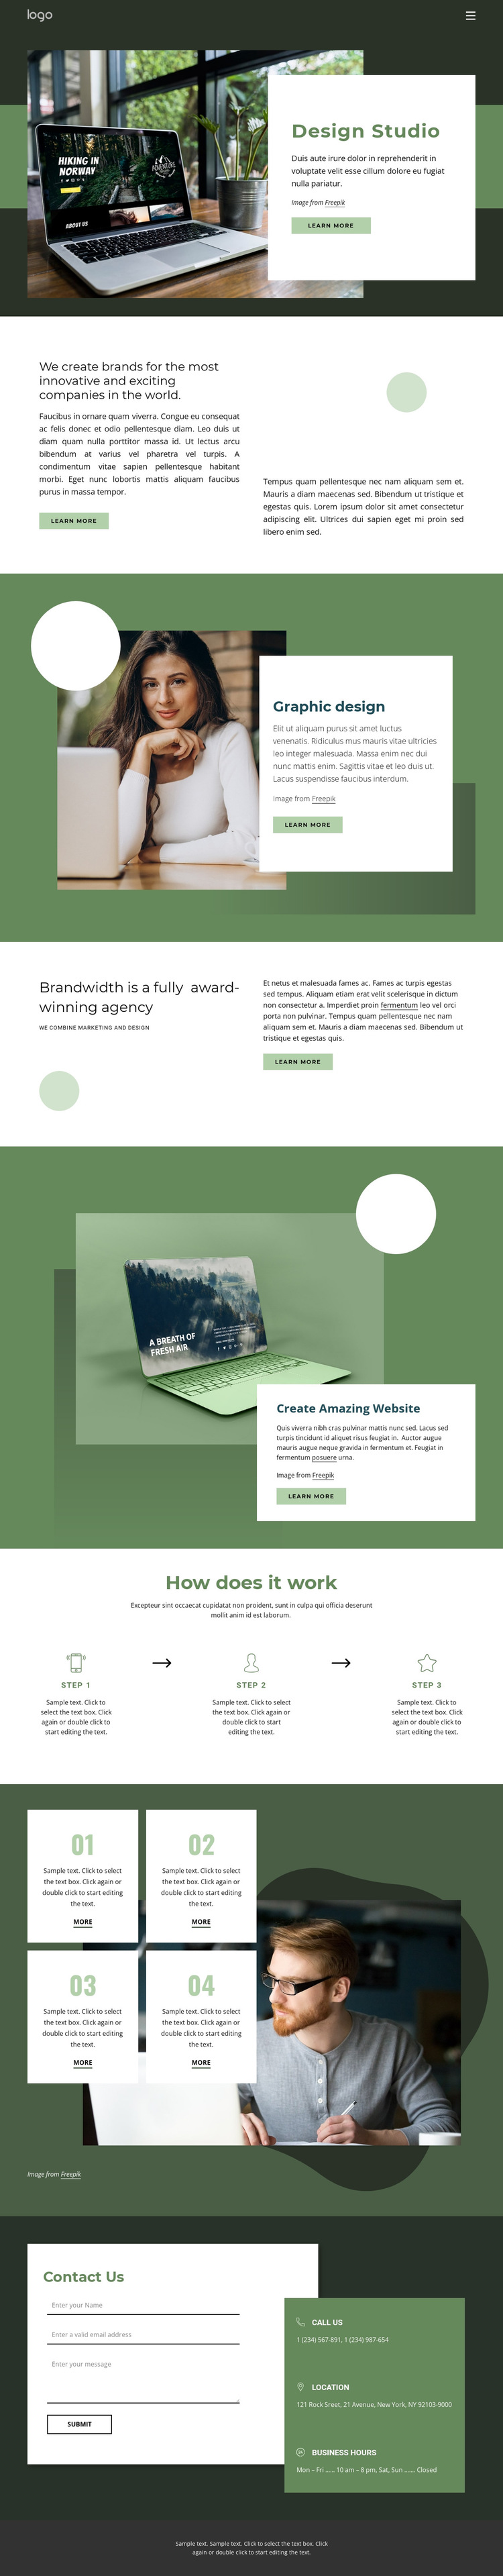 Design inspiration from nature HTML5 Template